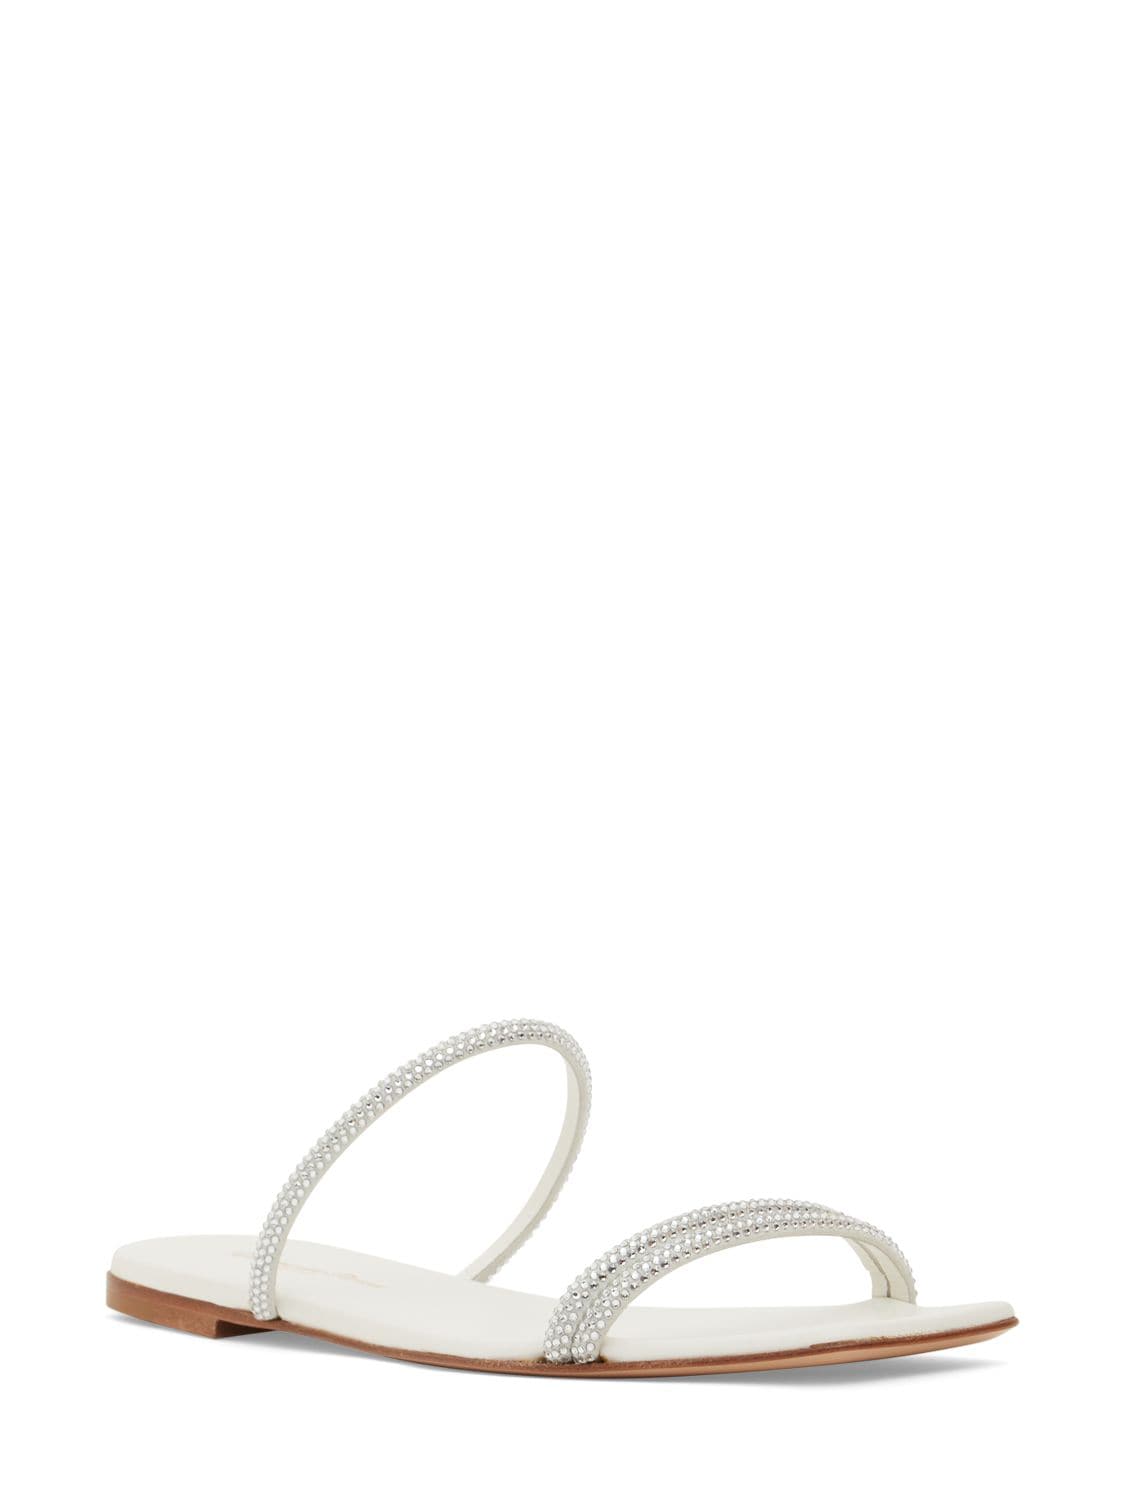 Shop Gianvito Rossi 10mm Cannes Flat Sandals W/crystals In White